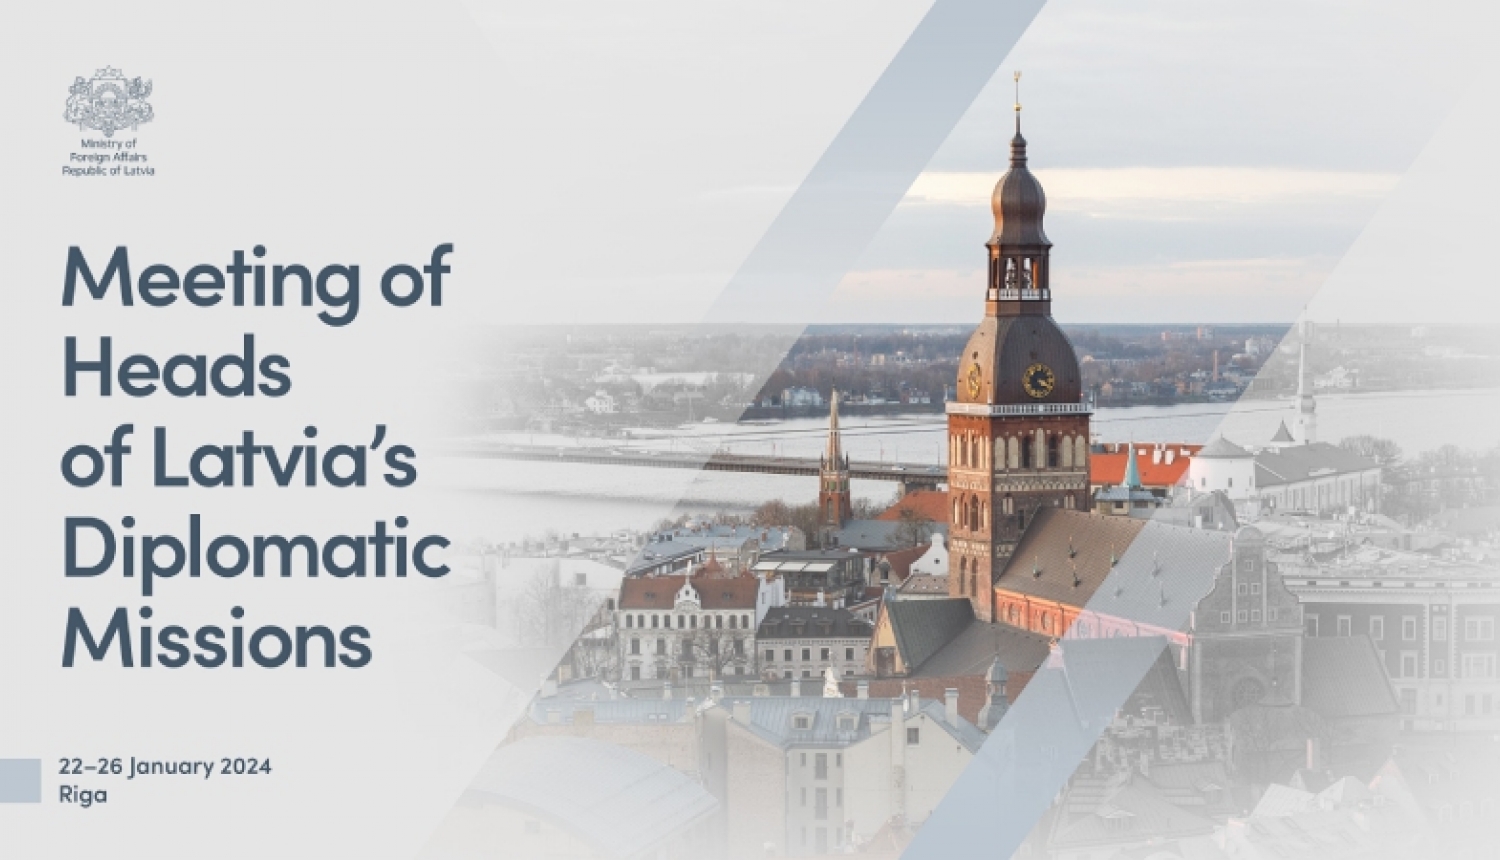 Meeting of heads of Latvia's diplomatic missions